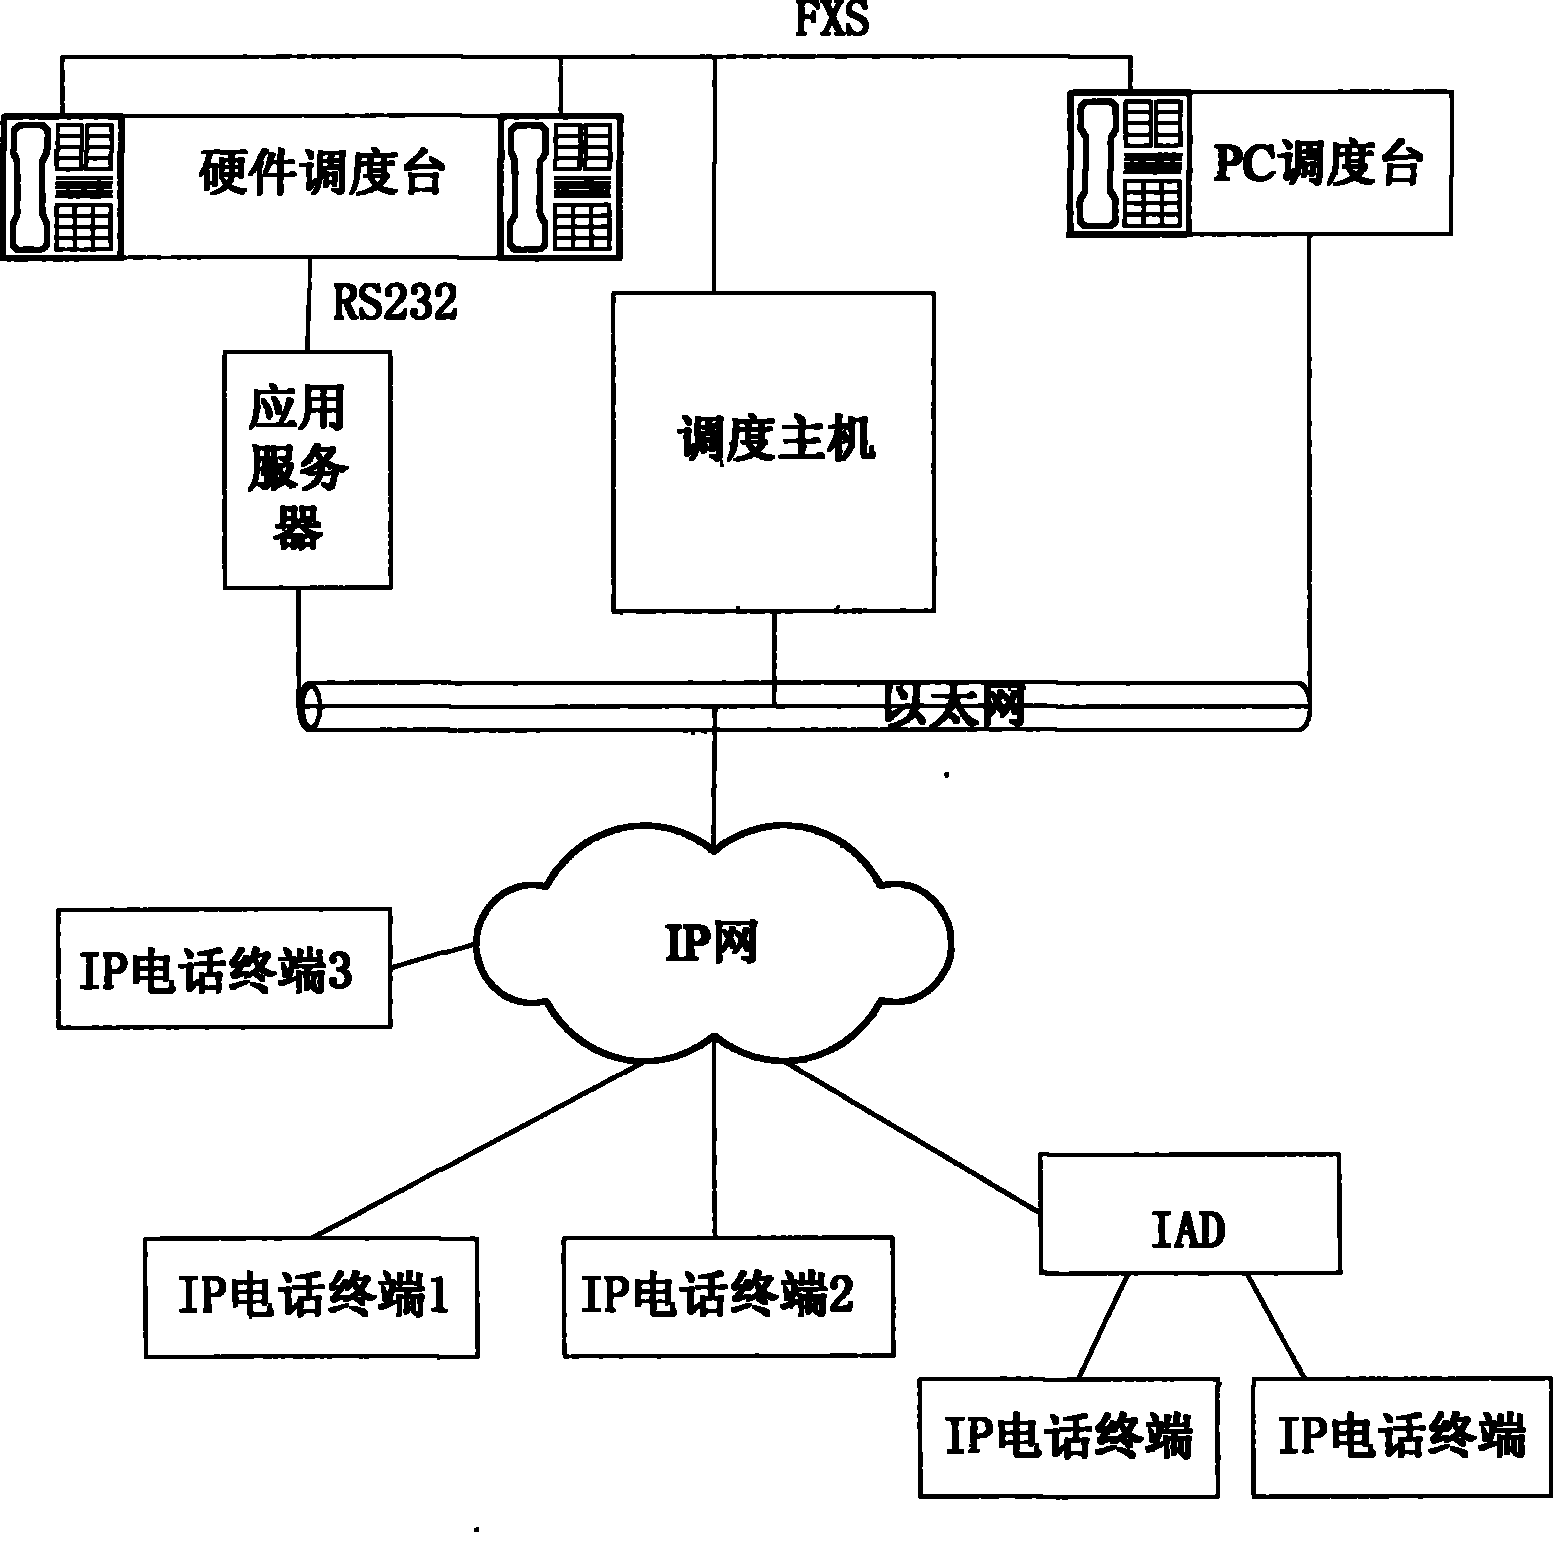 Digital program controlled scheduling communication system based on IP technique and its working method